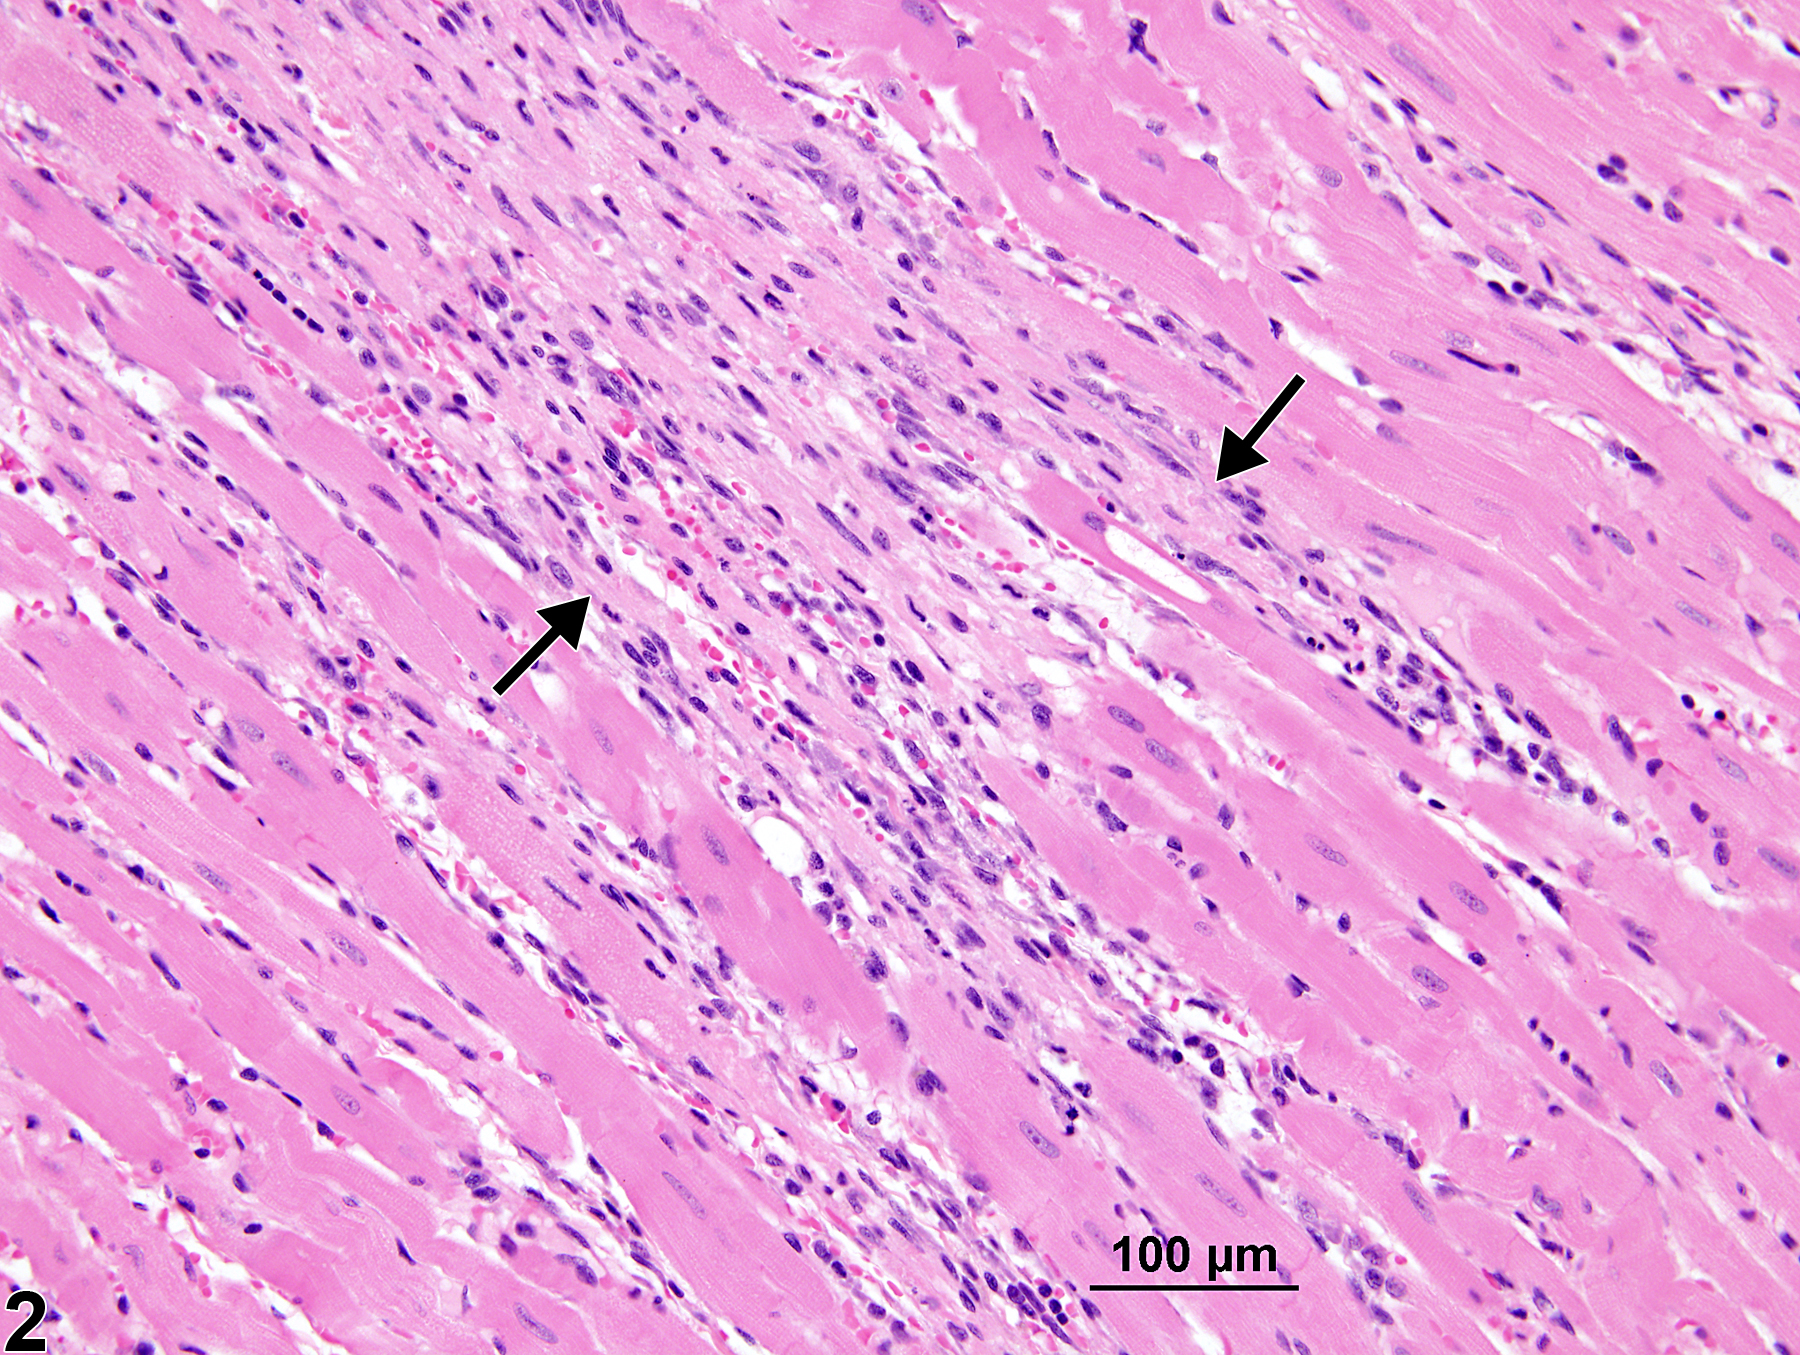 Image of cardiomyopathy in the heart from a female Harlan Sprague-Dawley rat in a chronic study